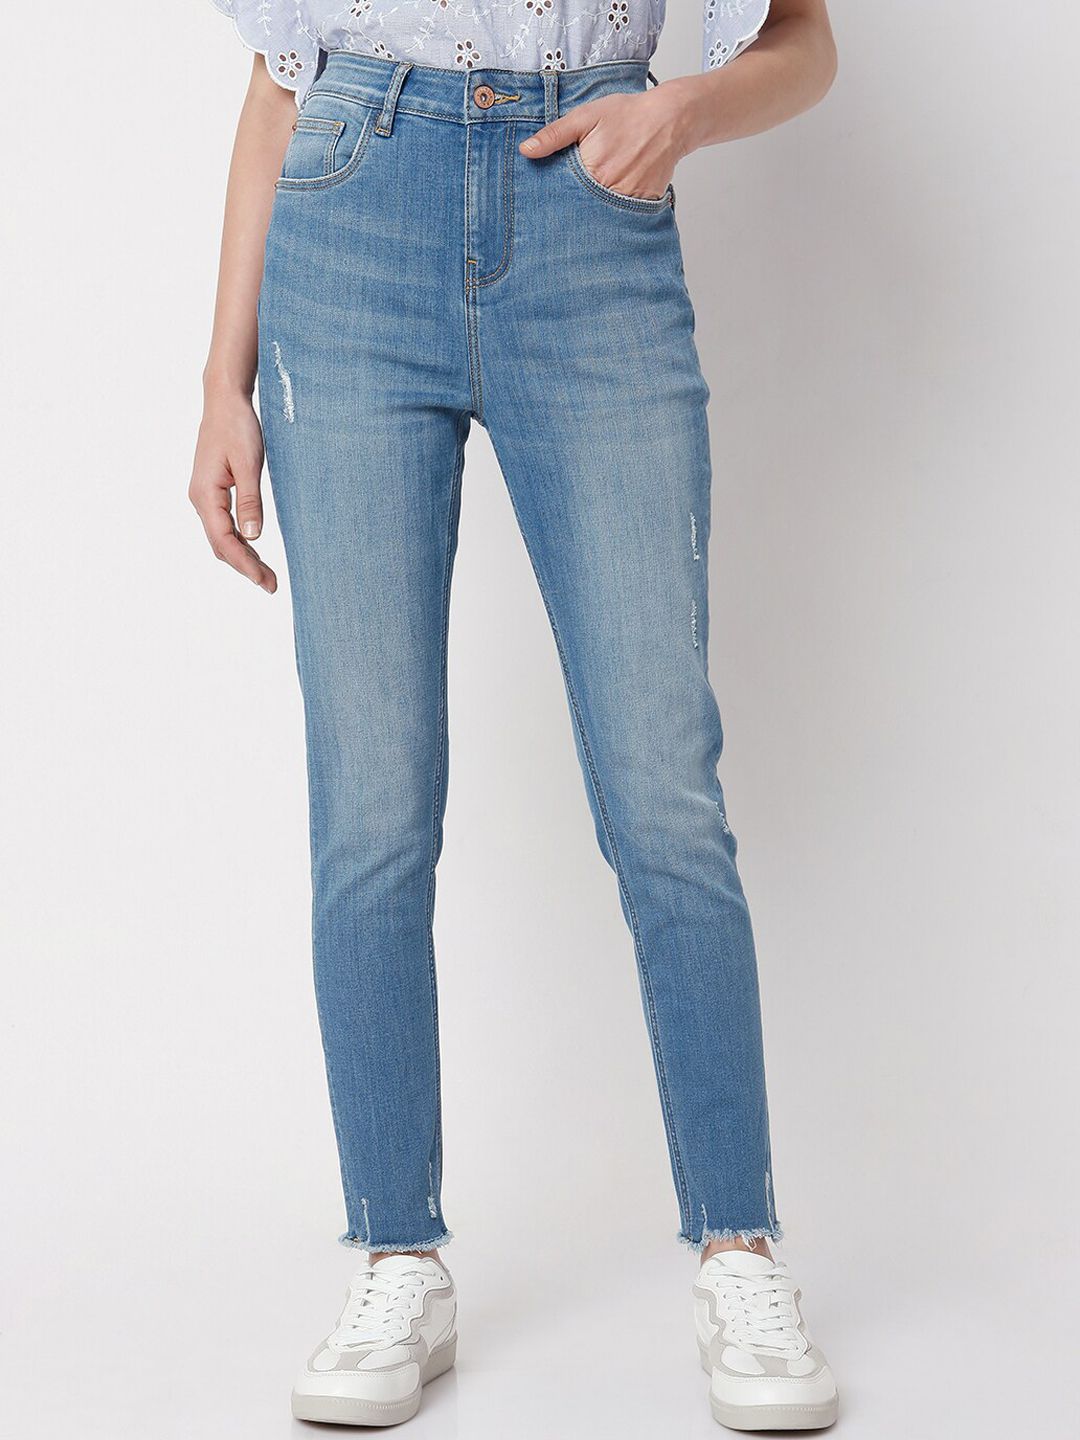 Vero Moda Women Blue Slim Fit High-Rise Mildly Distressed Light Fade Jeans Price in India